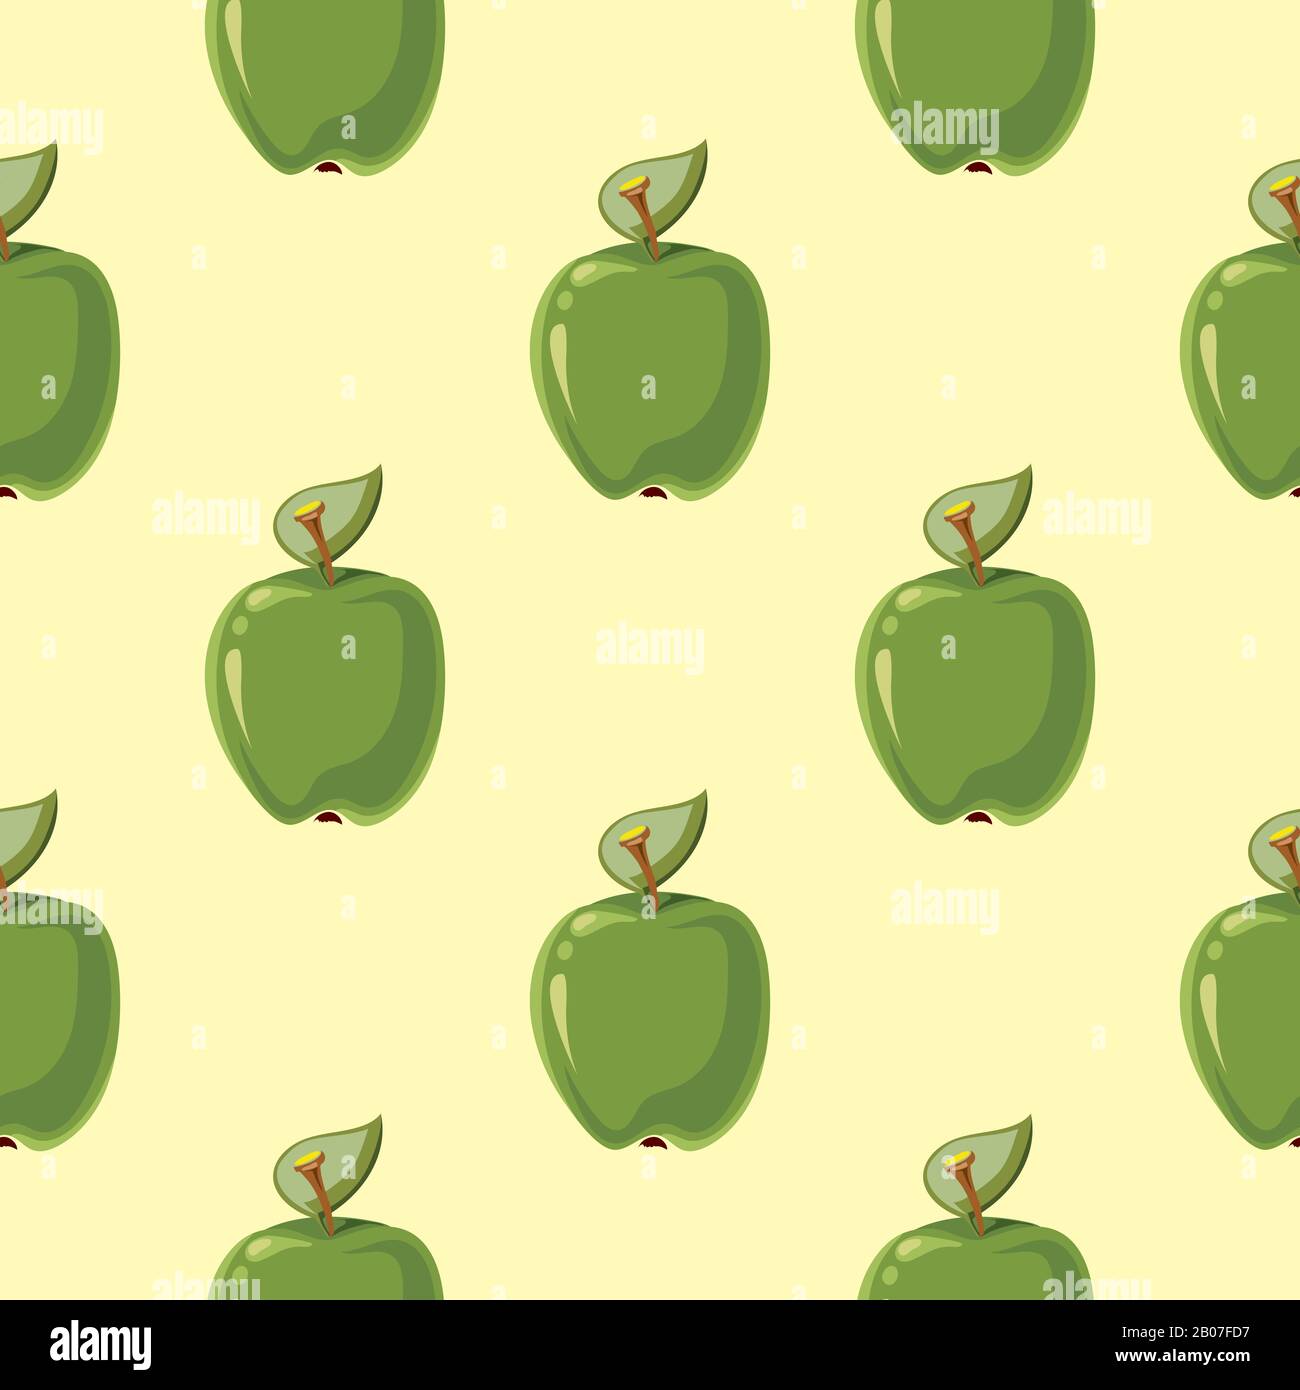 Green vector apples seamless pattern background. Fresh natural fruits illustration Stock Vector